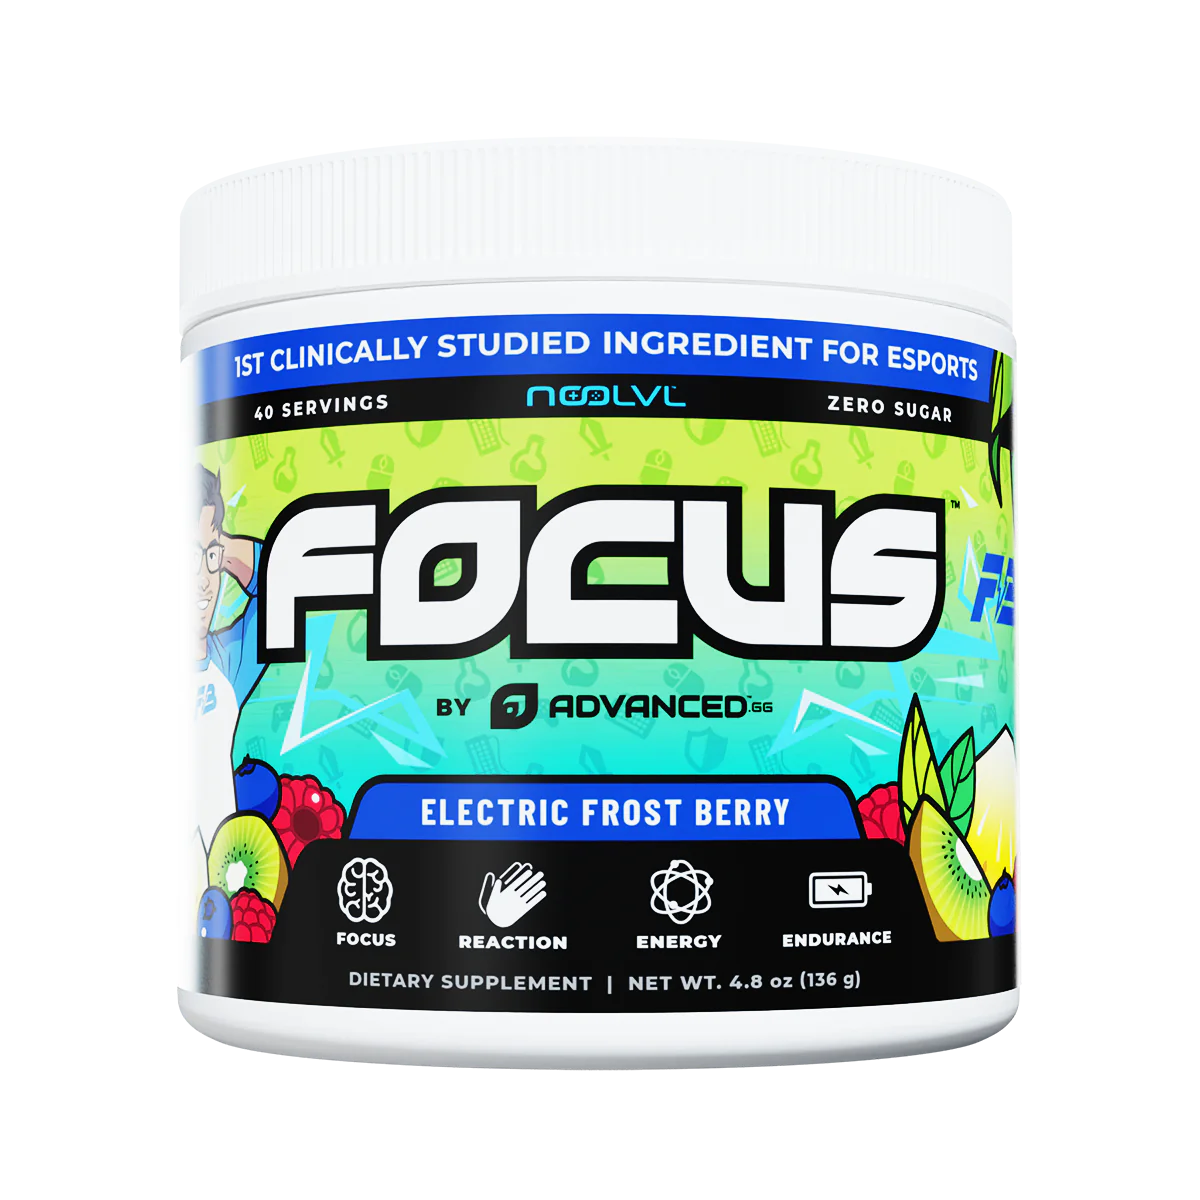 Focus 2.0™ | Electric Frost Berry